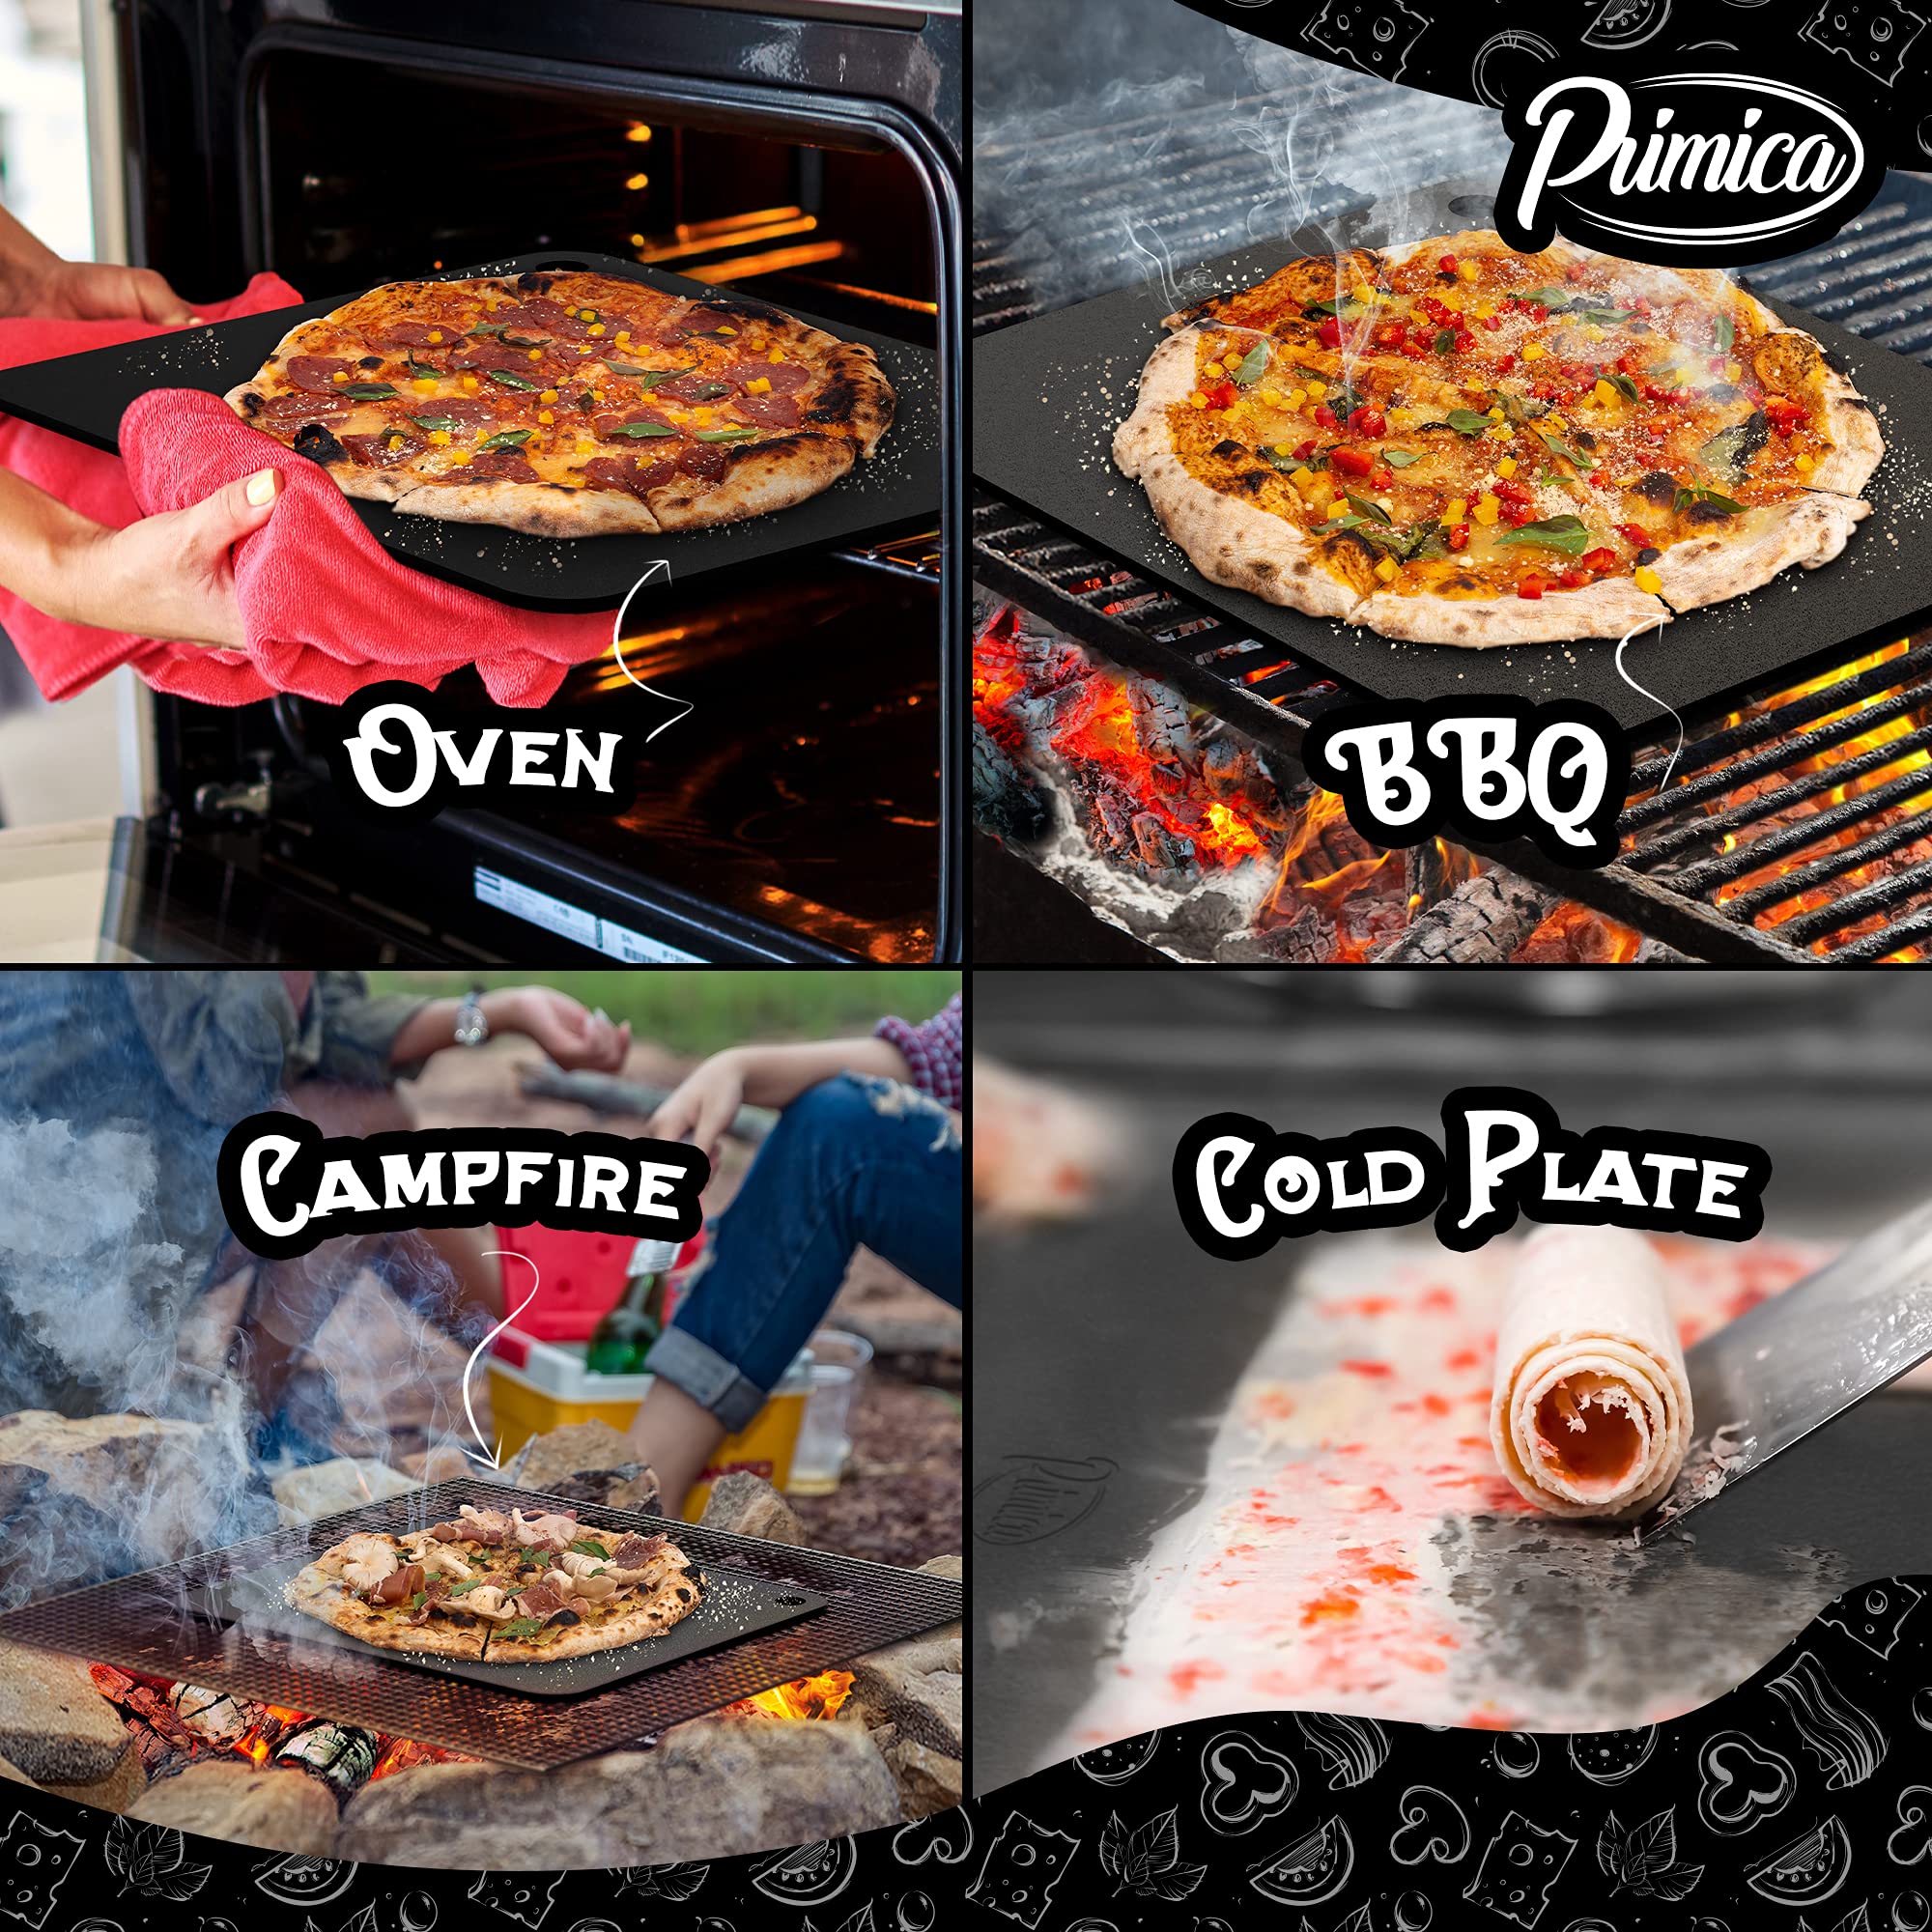 Primica Pizza Steel for Oven - 16” x 13.4” x ¼” Durable Steel as Alternative to Pizza Stone - High Quality Steel for BBQ Grill and Bakings